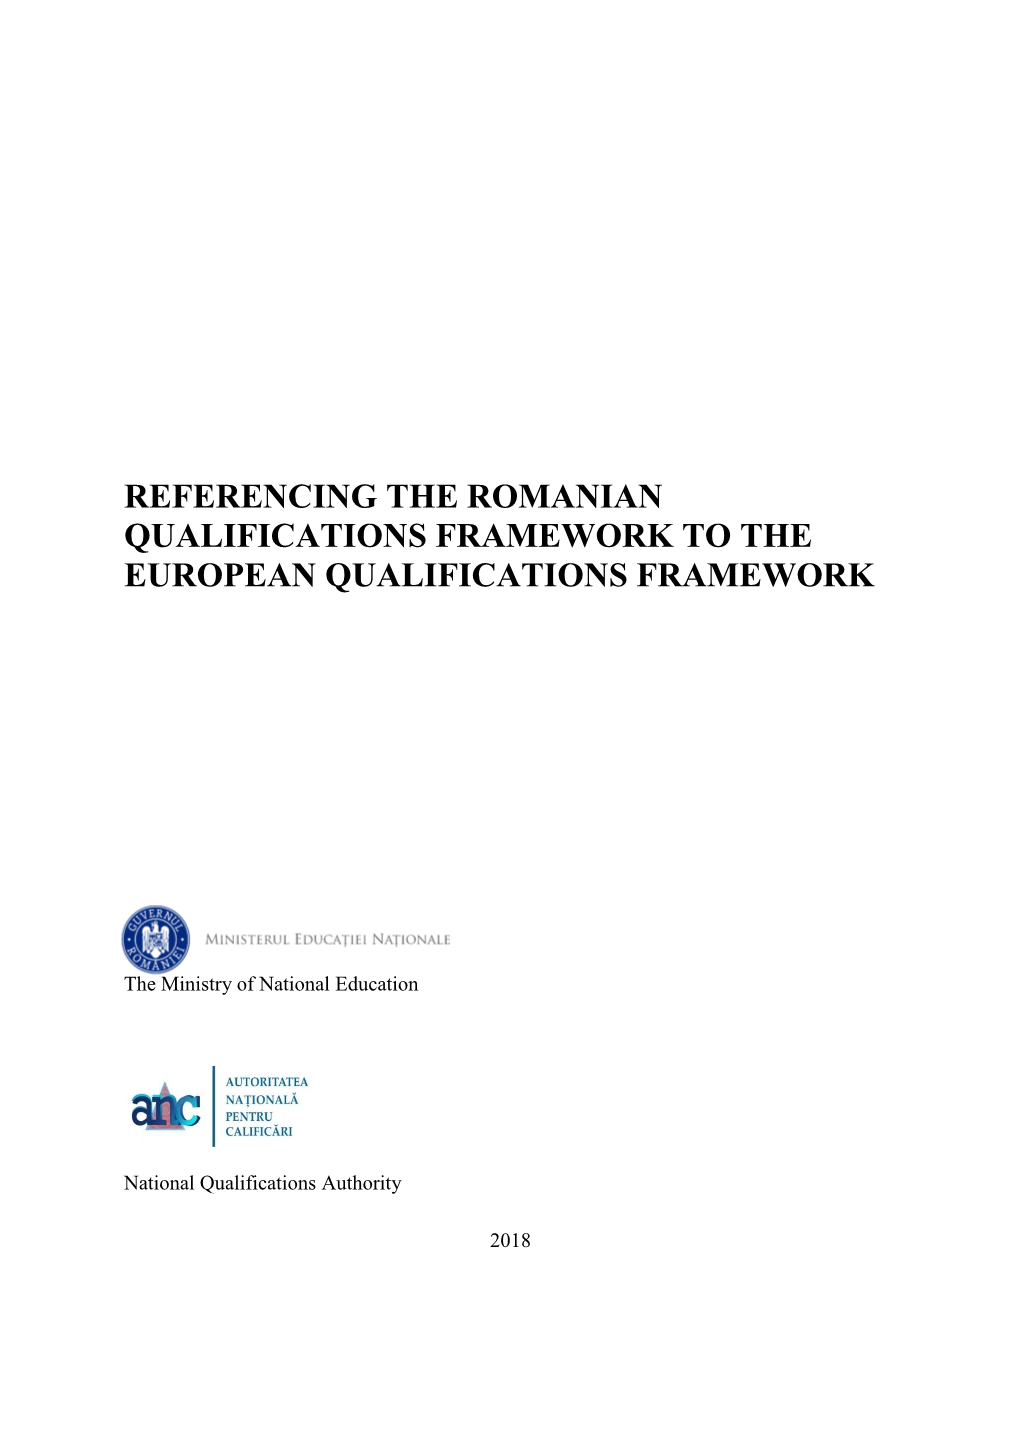 Referencing the Romanian Qualifications Framework to the European Qualifications Framework